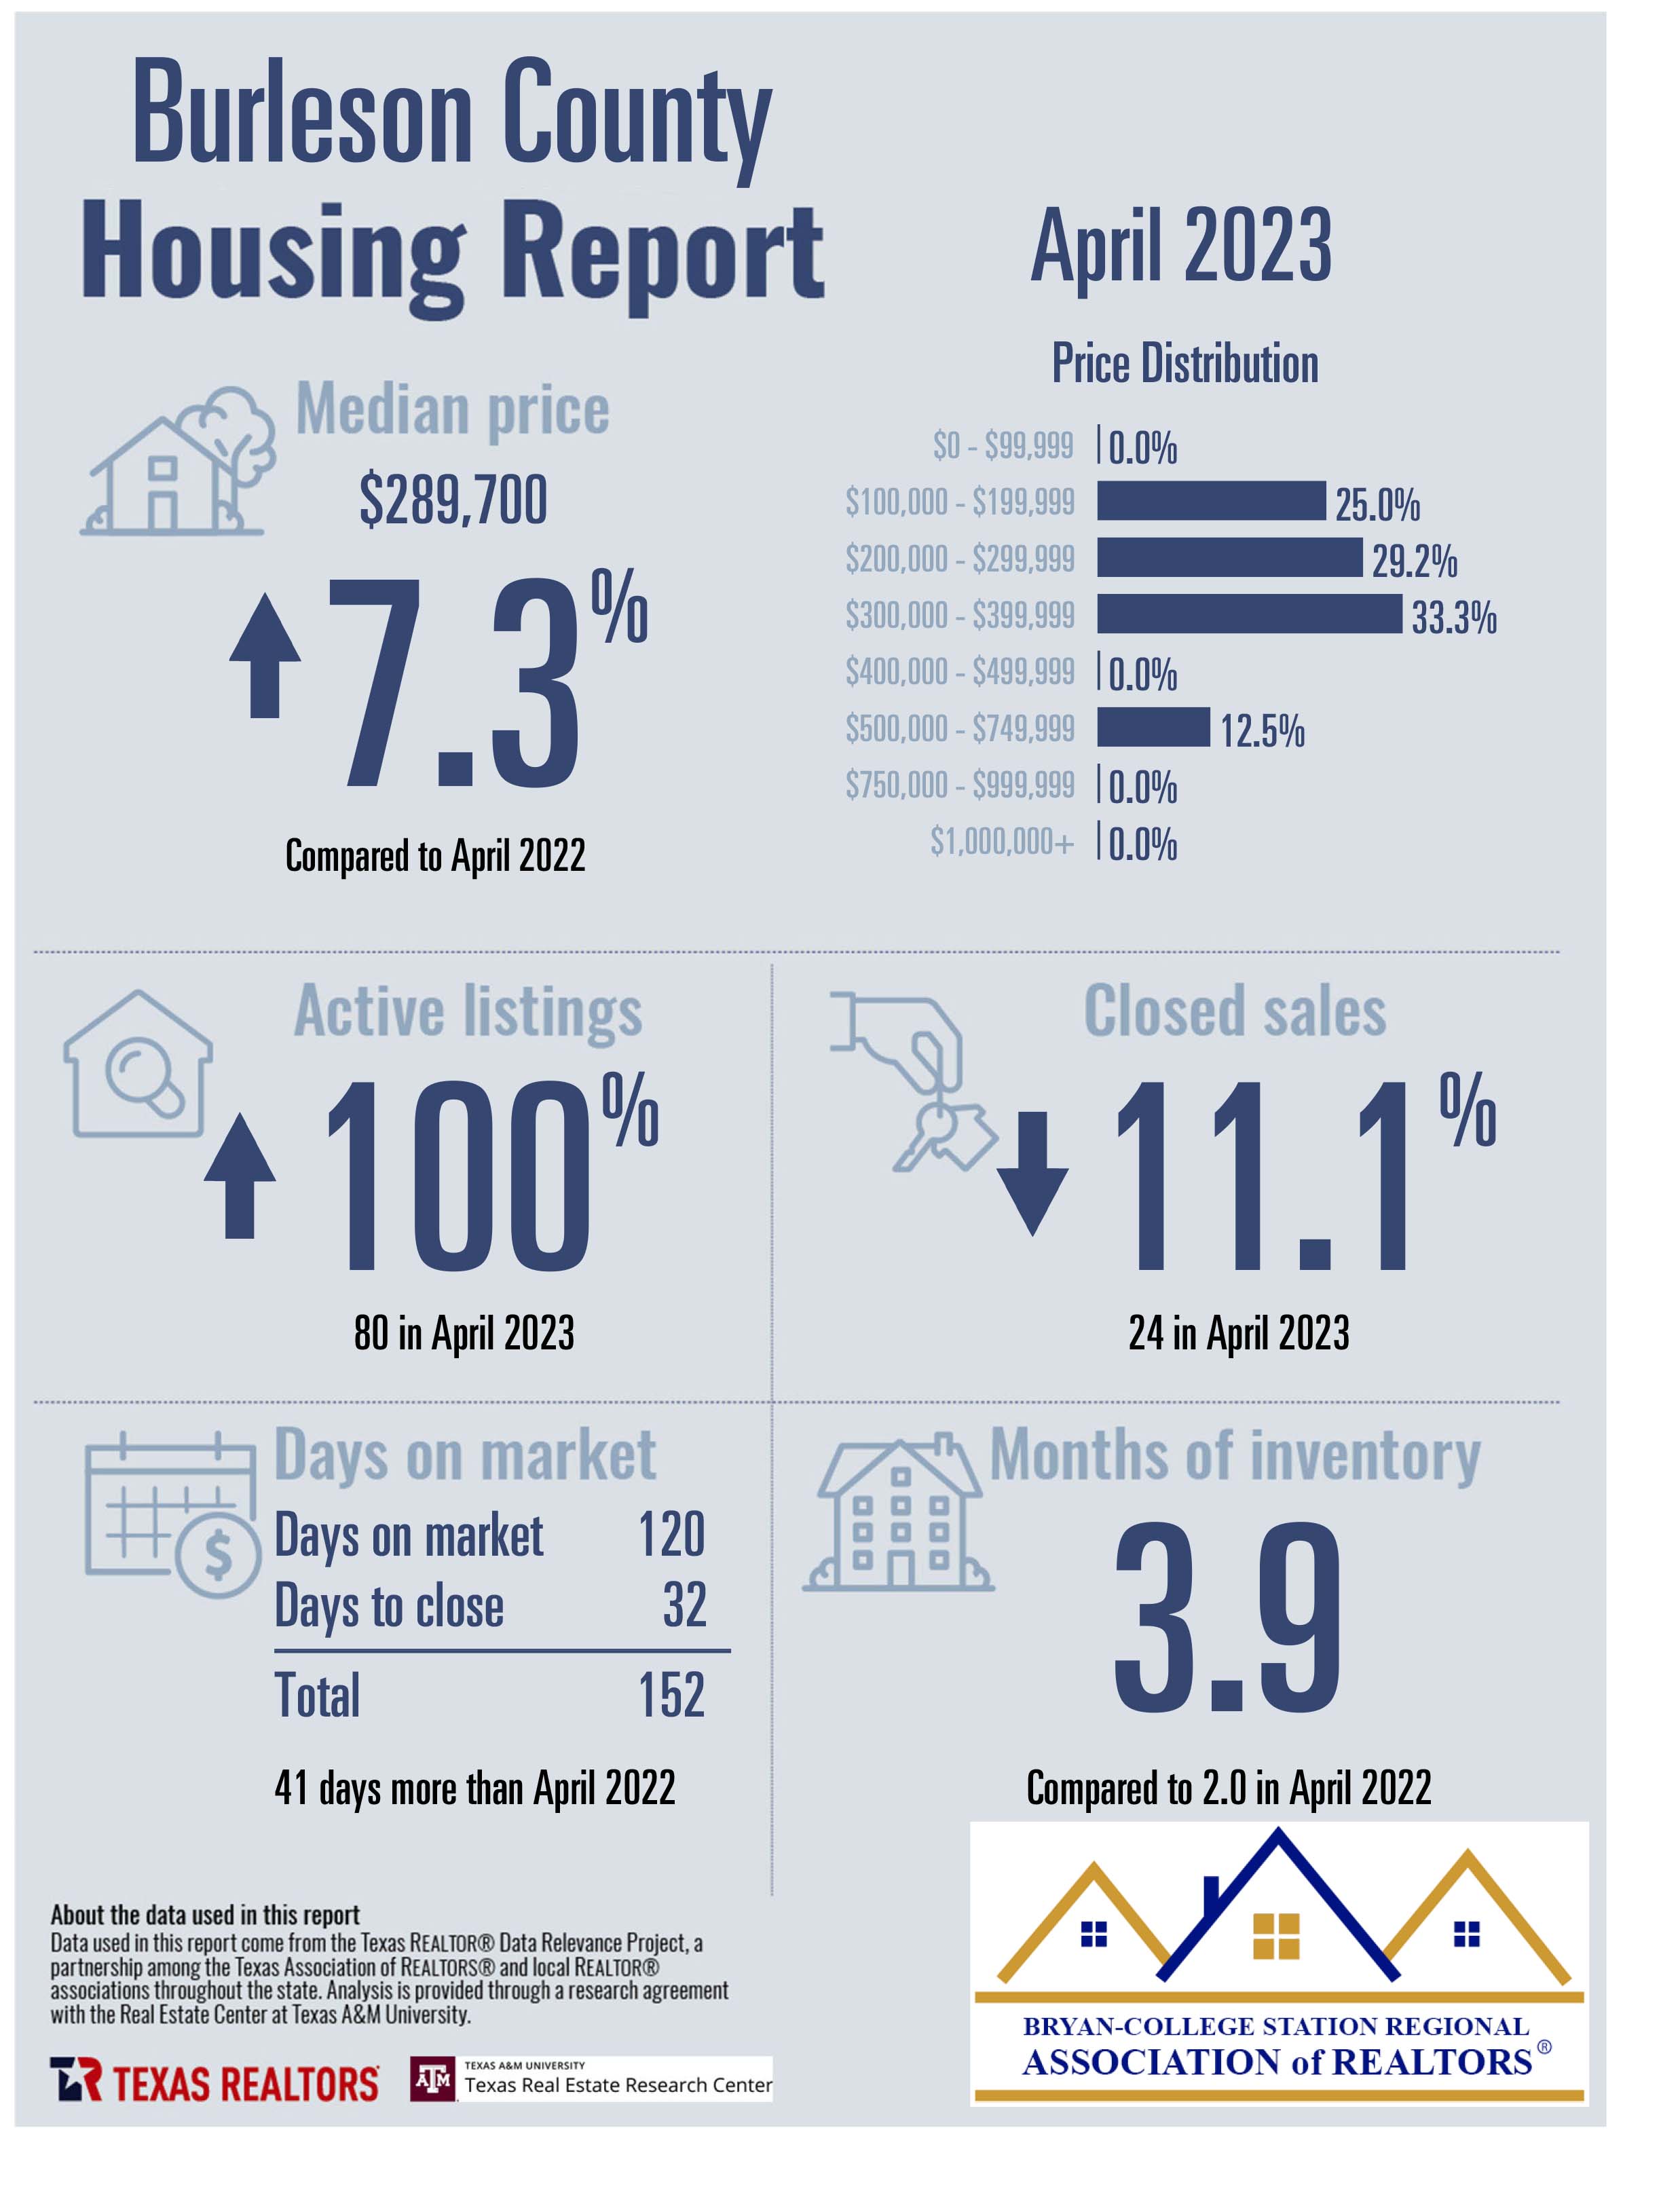 Residential Home Sale Report april 2023 - Burleson